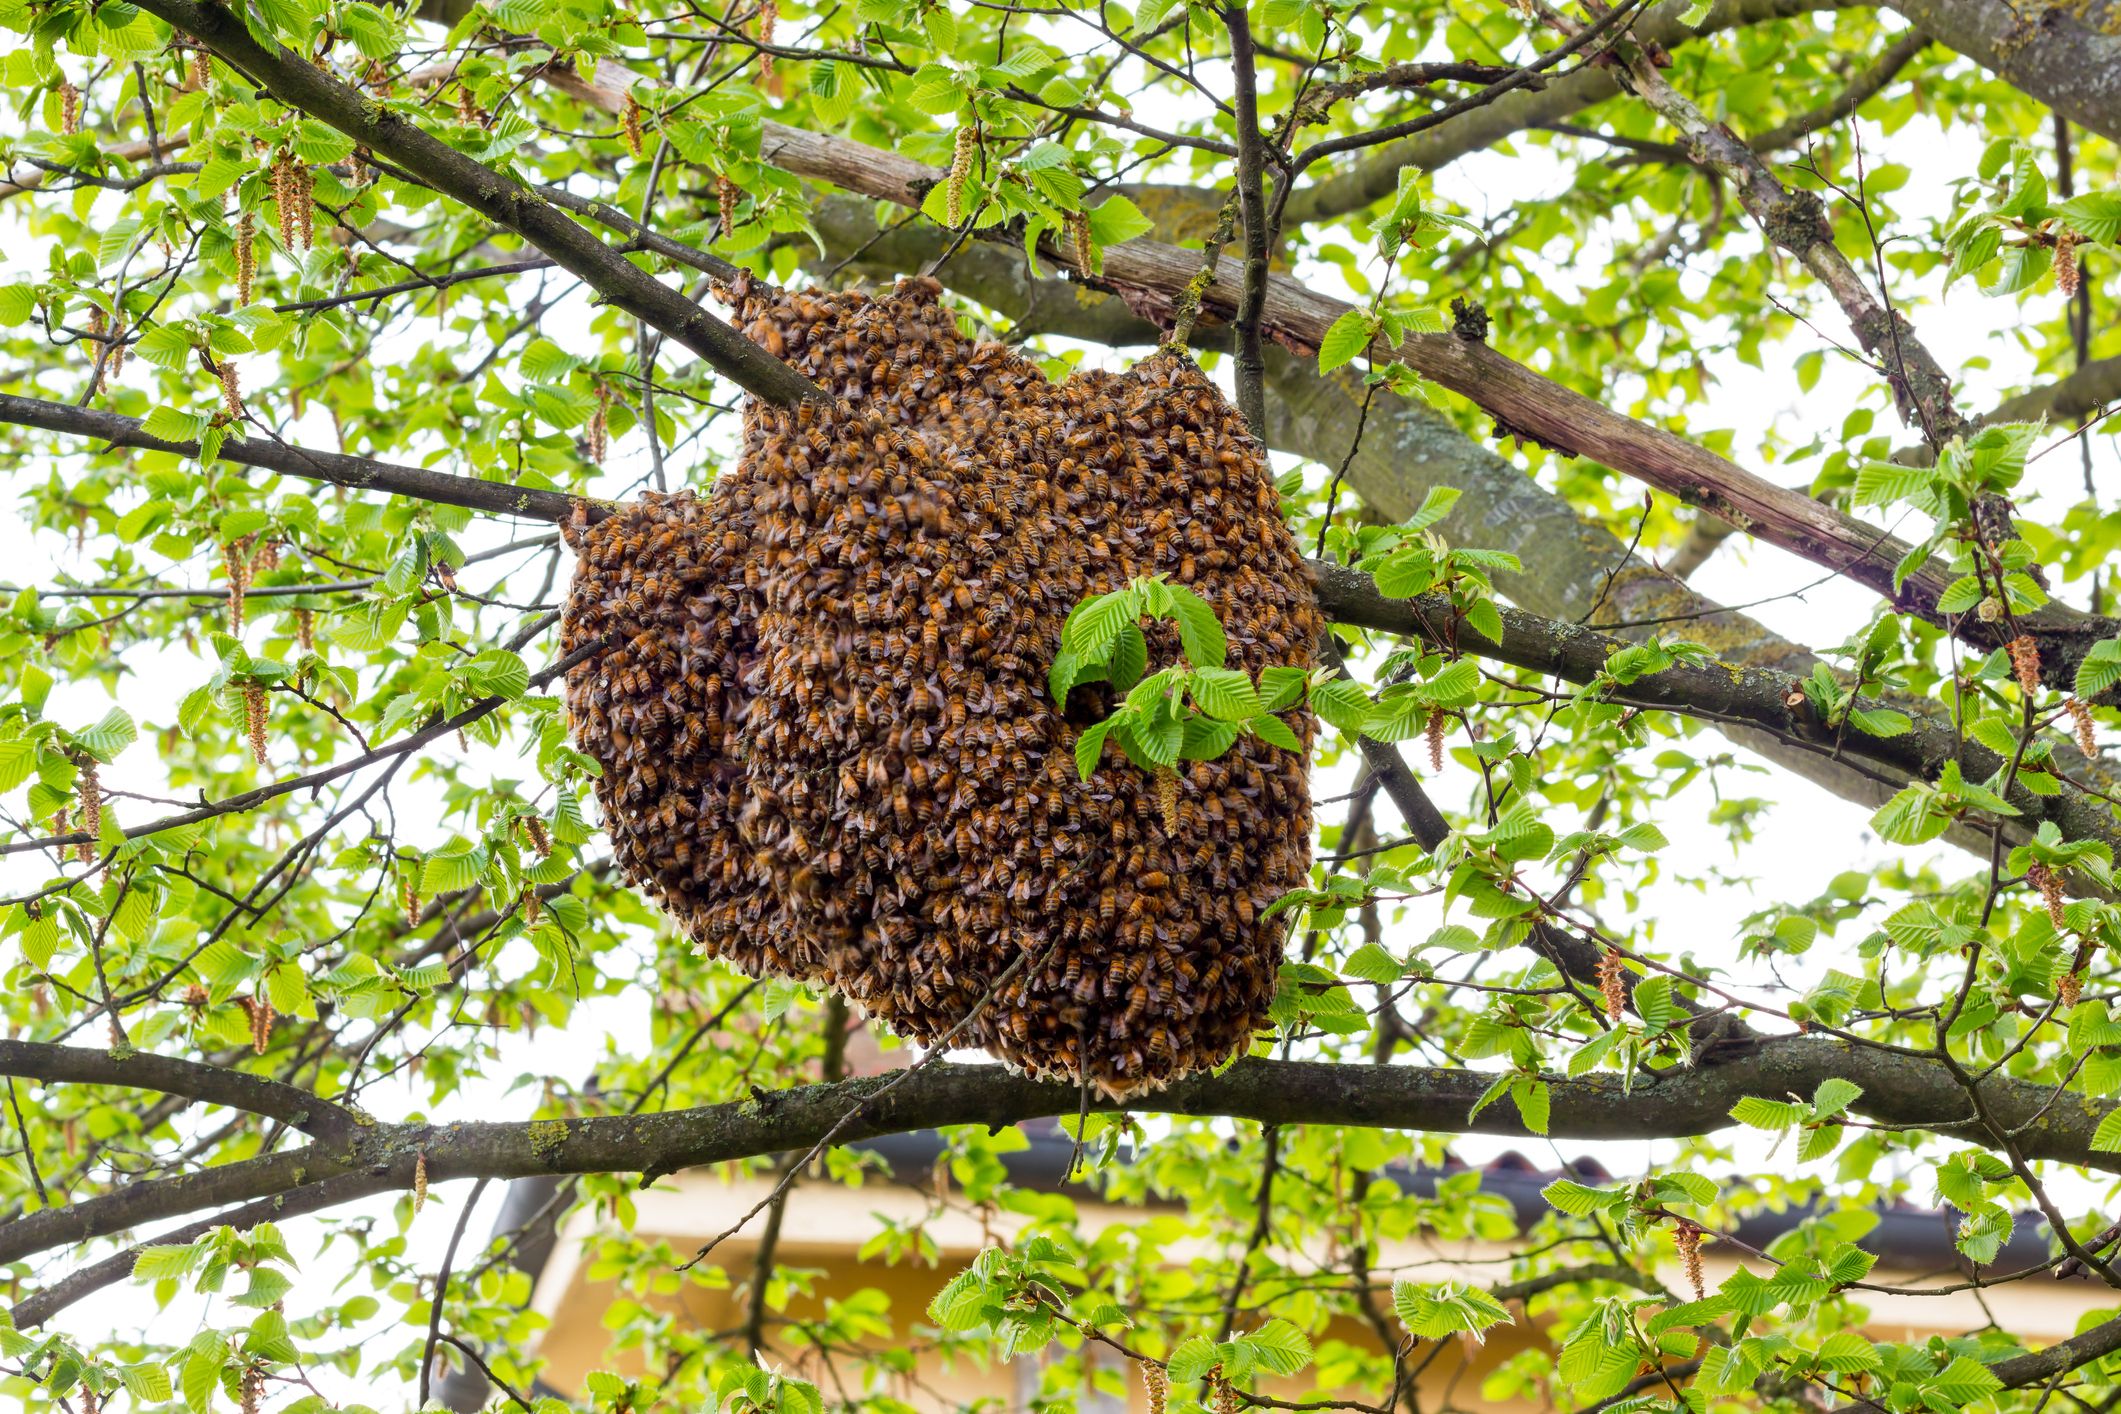 Swarms Of Bees Have Been Spotted Across The UK